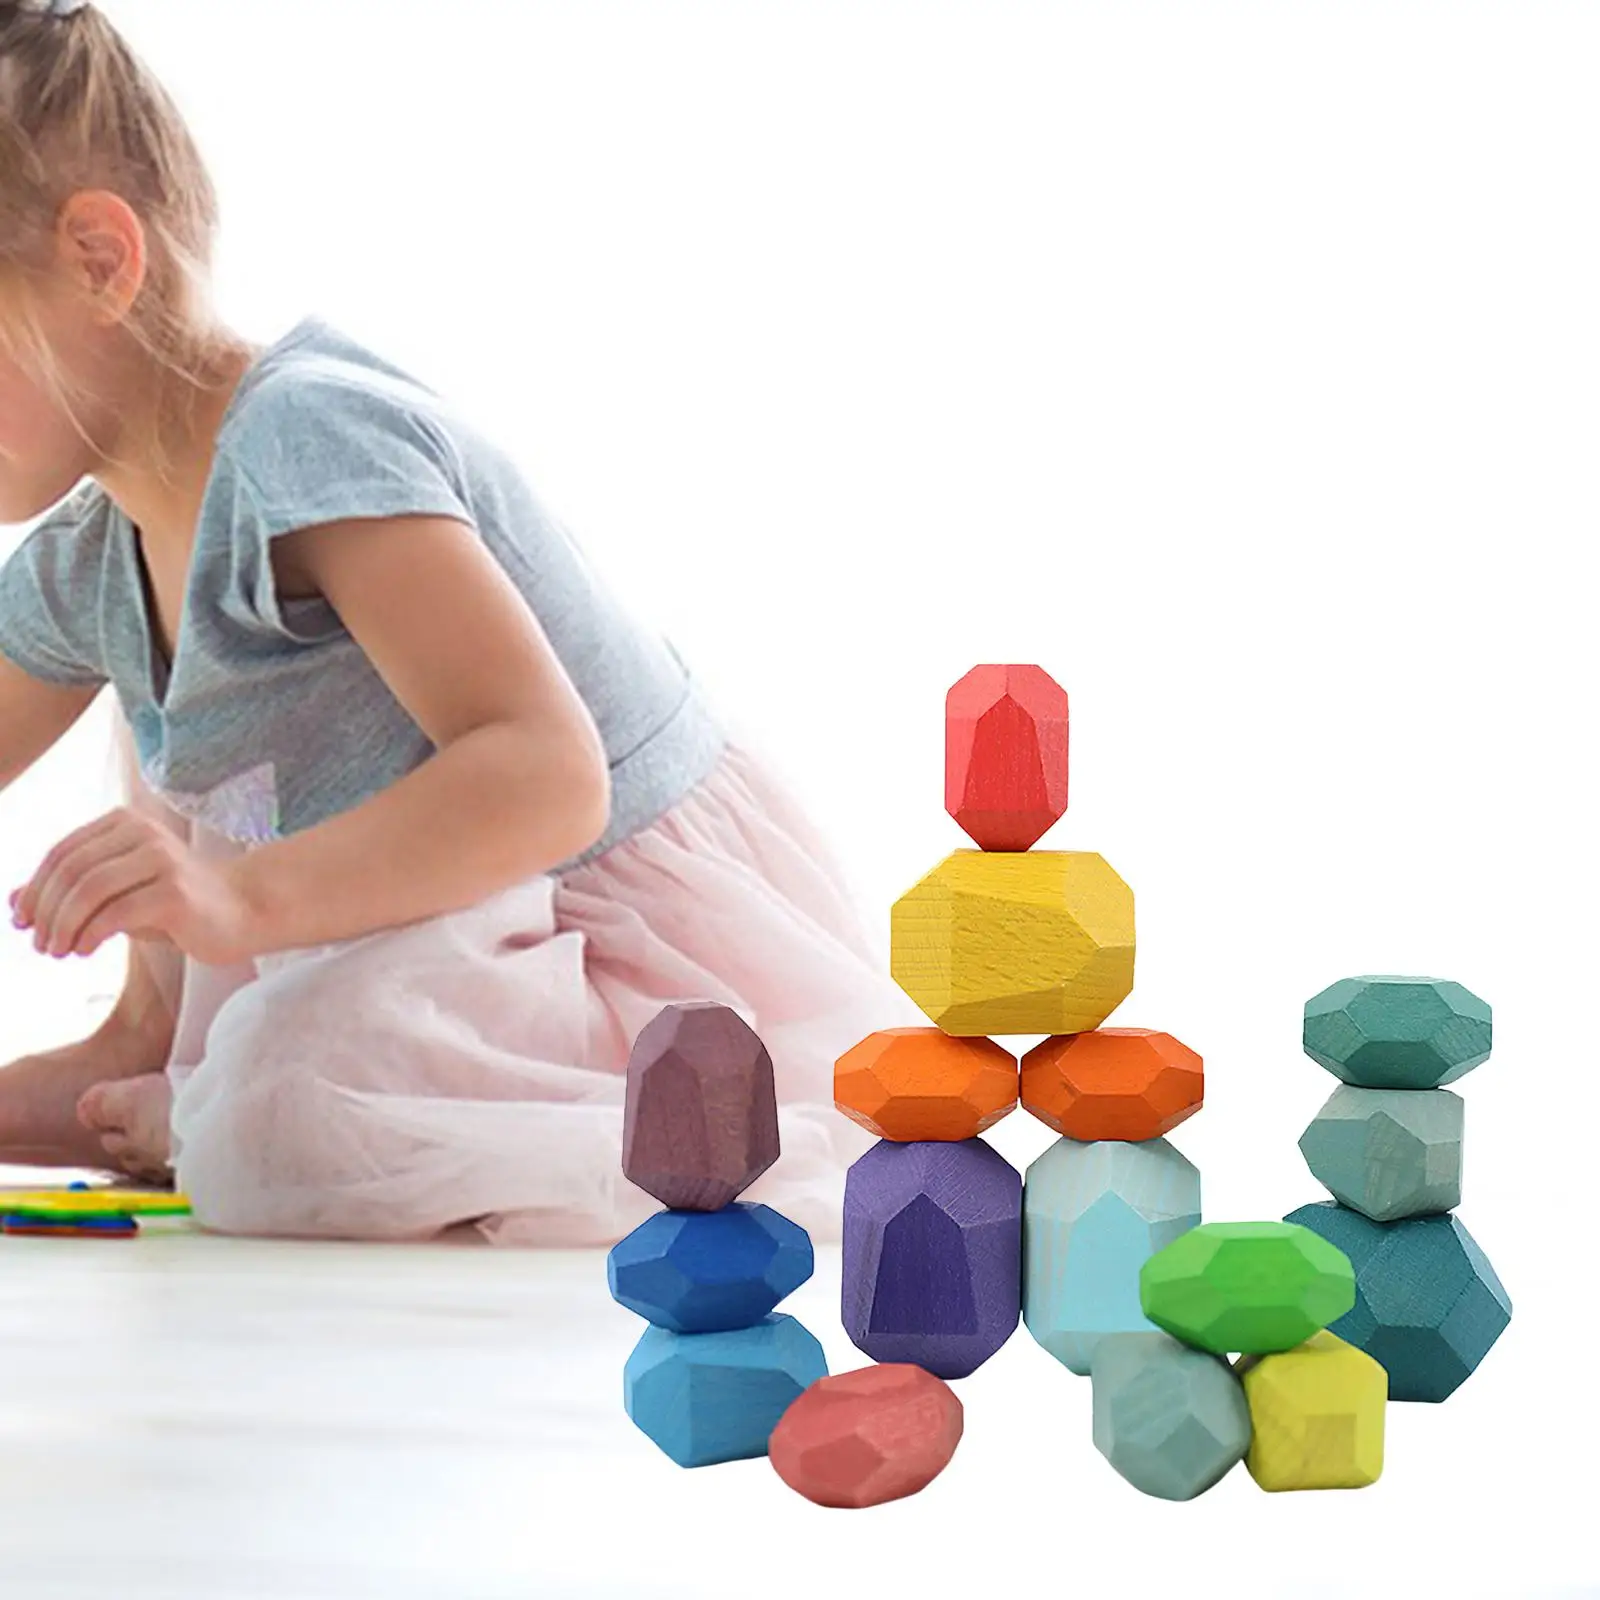 Wooden Balancing Stacking Stones Montessori Puzzle Toys Preschool Learning Artware Building Blocks Stacking Game for Kids